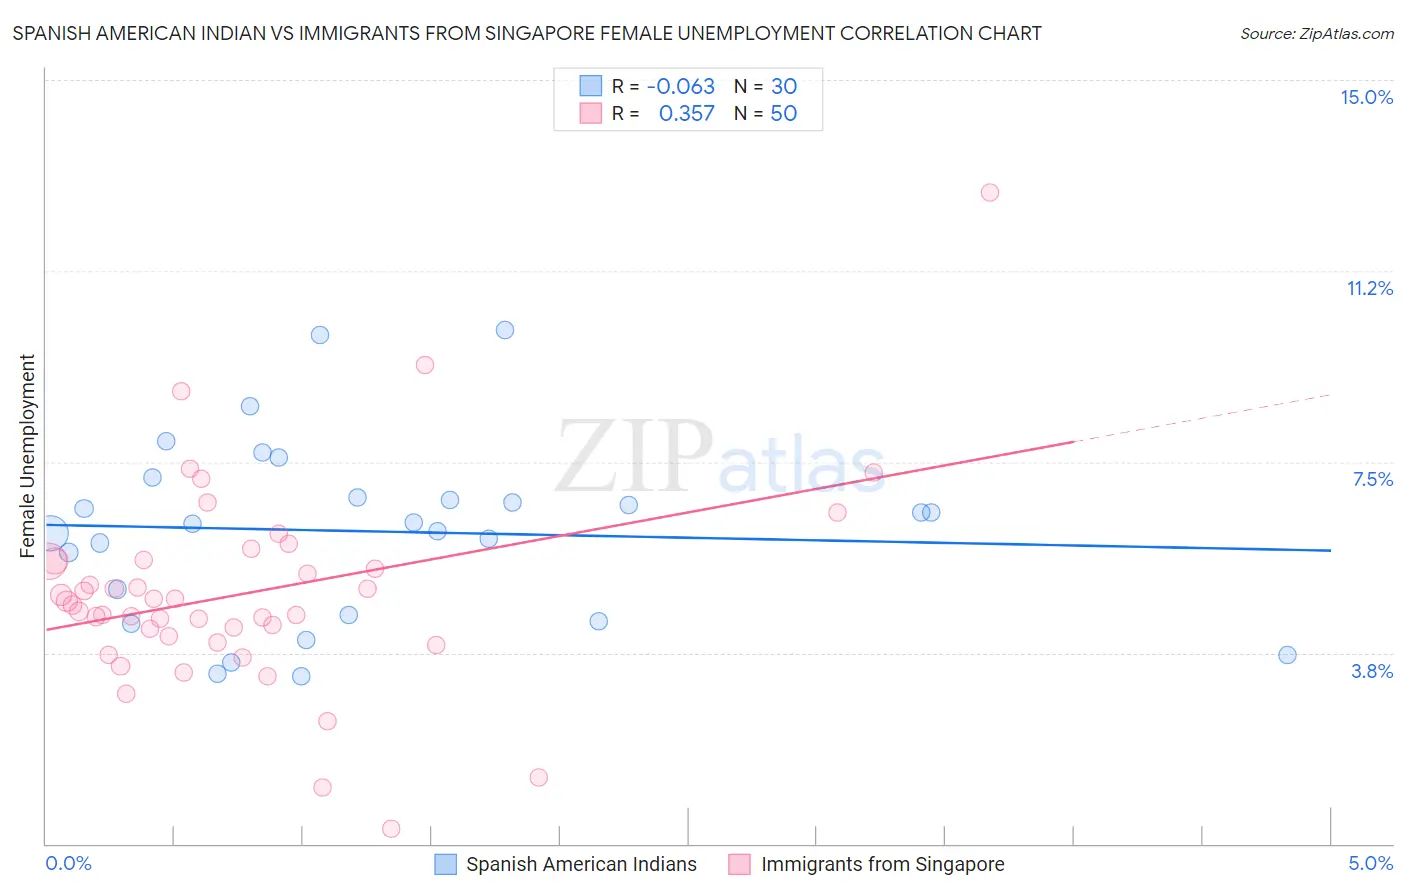 Spanish American Indian vs Immigrants from Singapore Female Unemployment